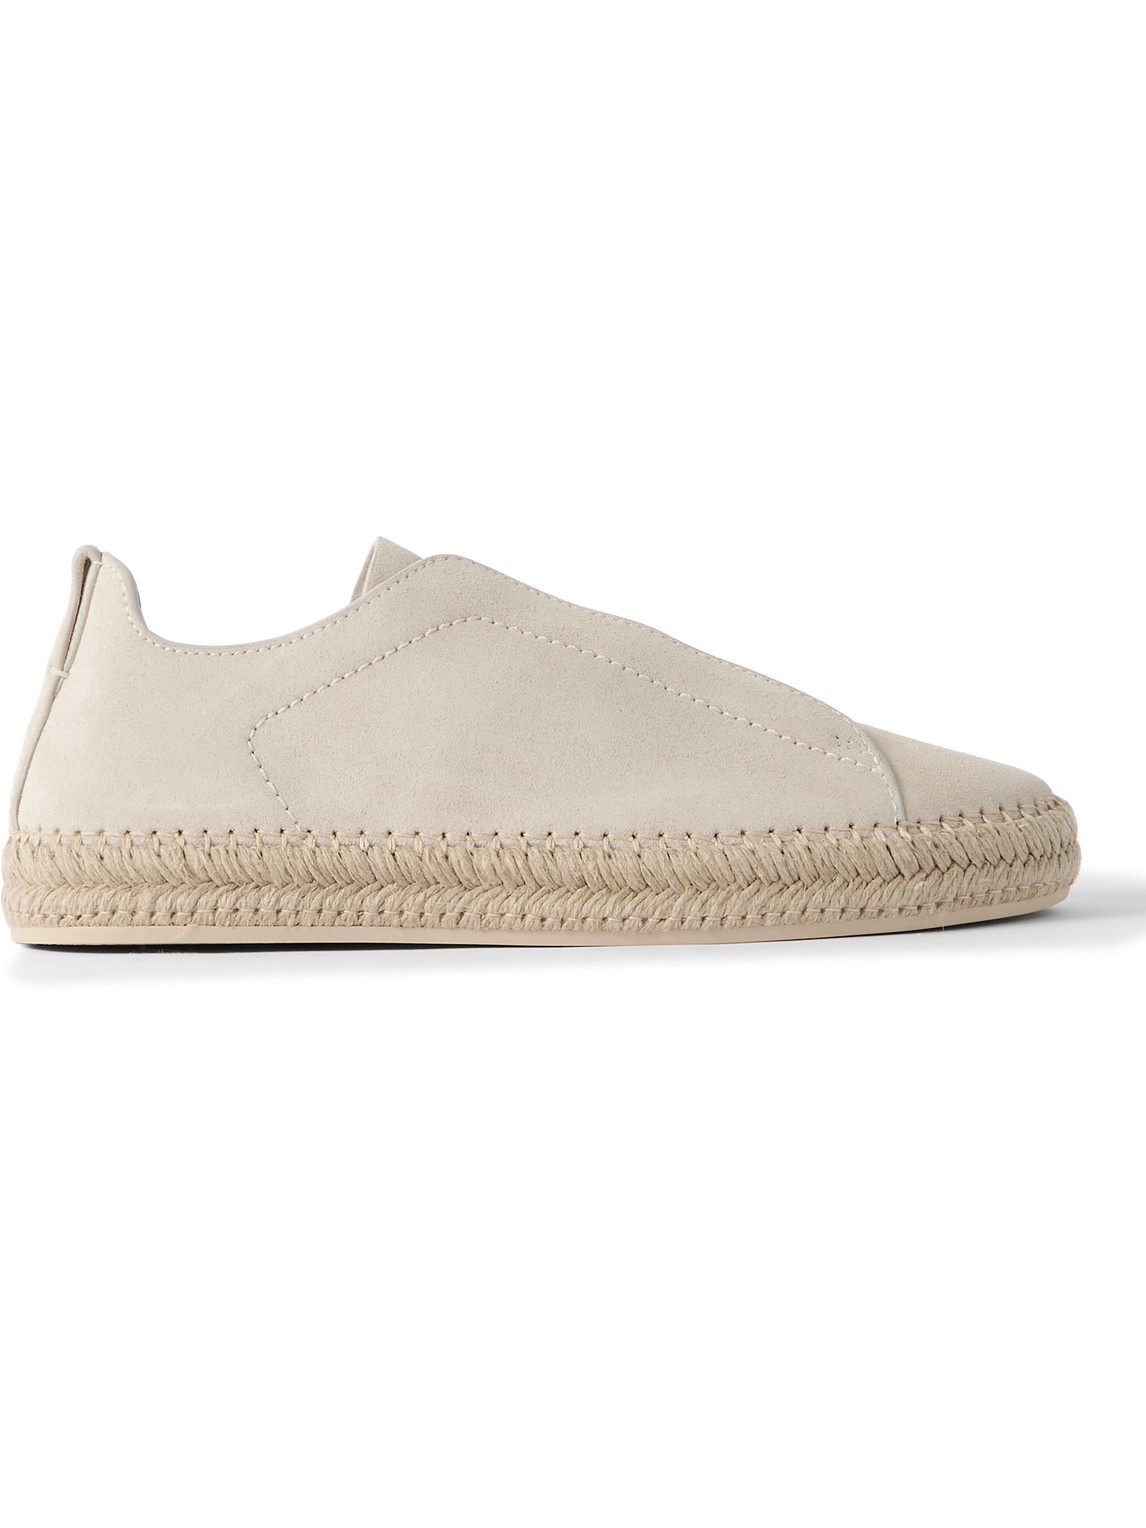 Zegna Triple Stitch™ Leather-trimmed Suede Slip-on Sneakers In Neutrals